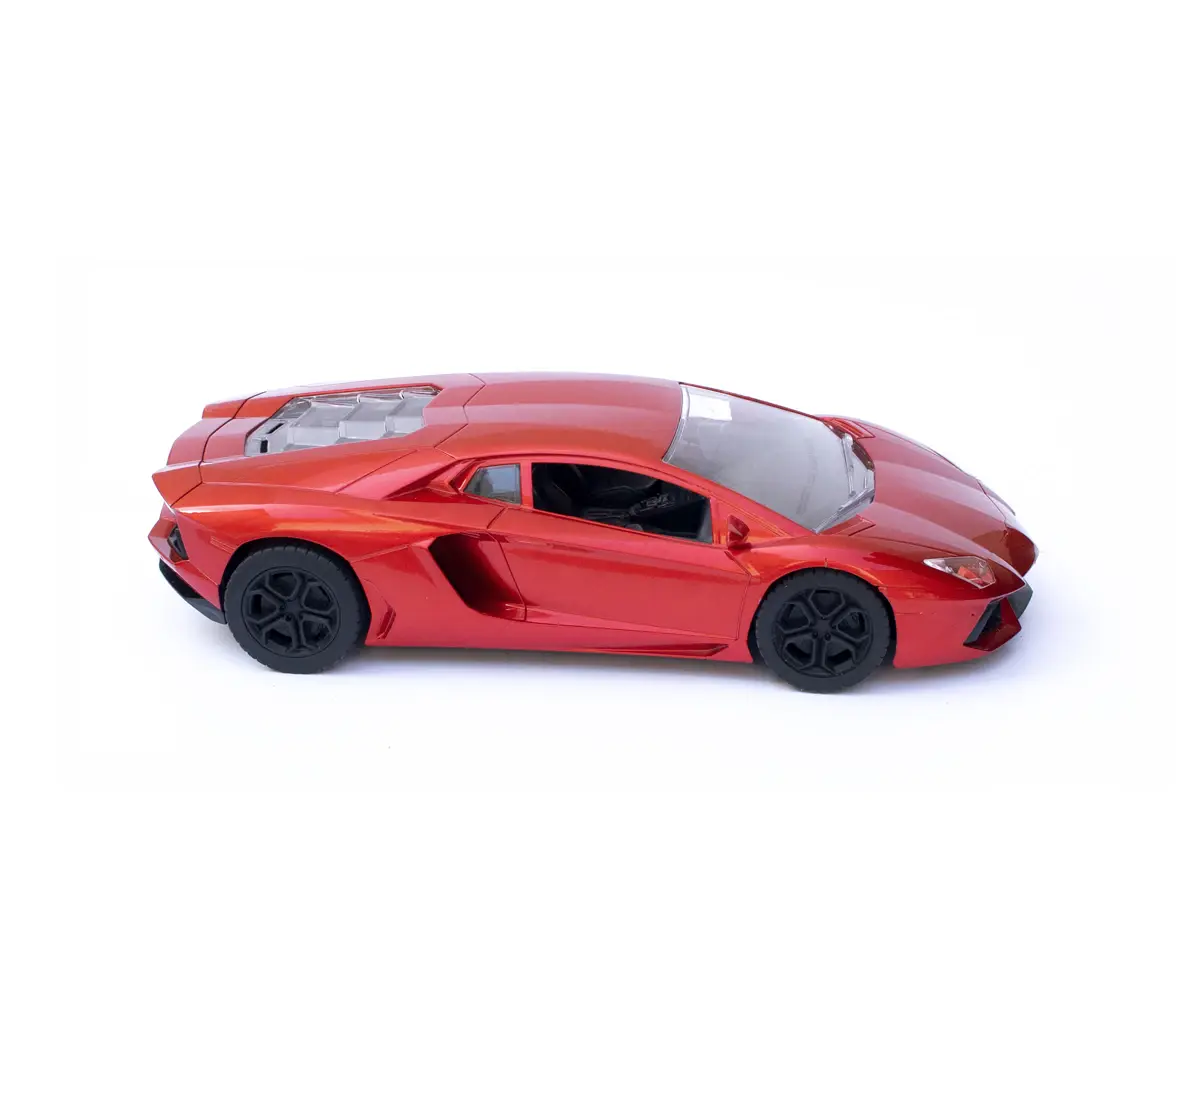 Seedo Electric Remote Controlled Luxurious Sports Racing Car For Kids of Age 4Y+, Red, Red